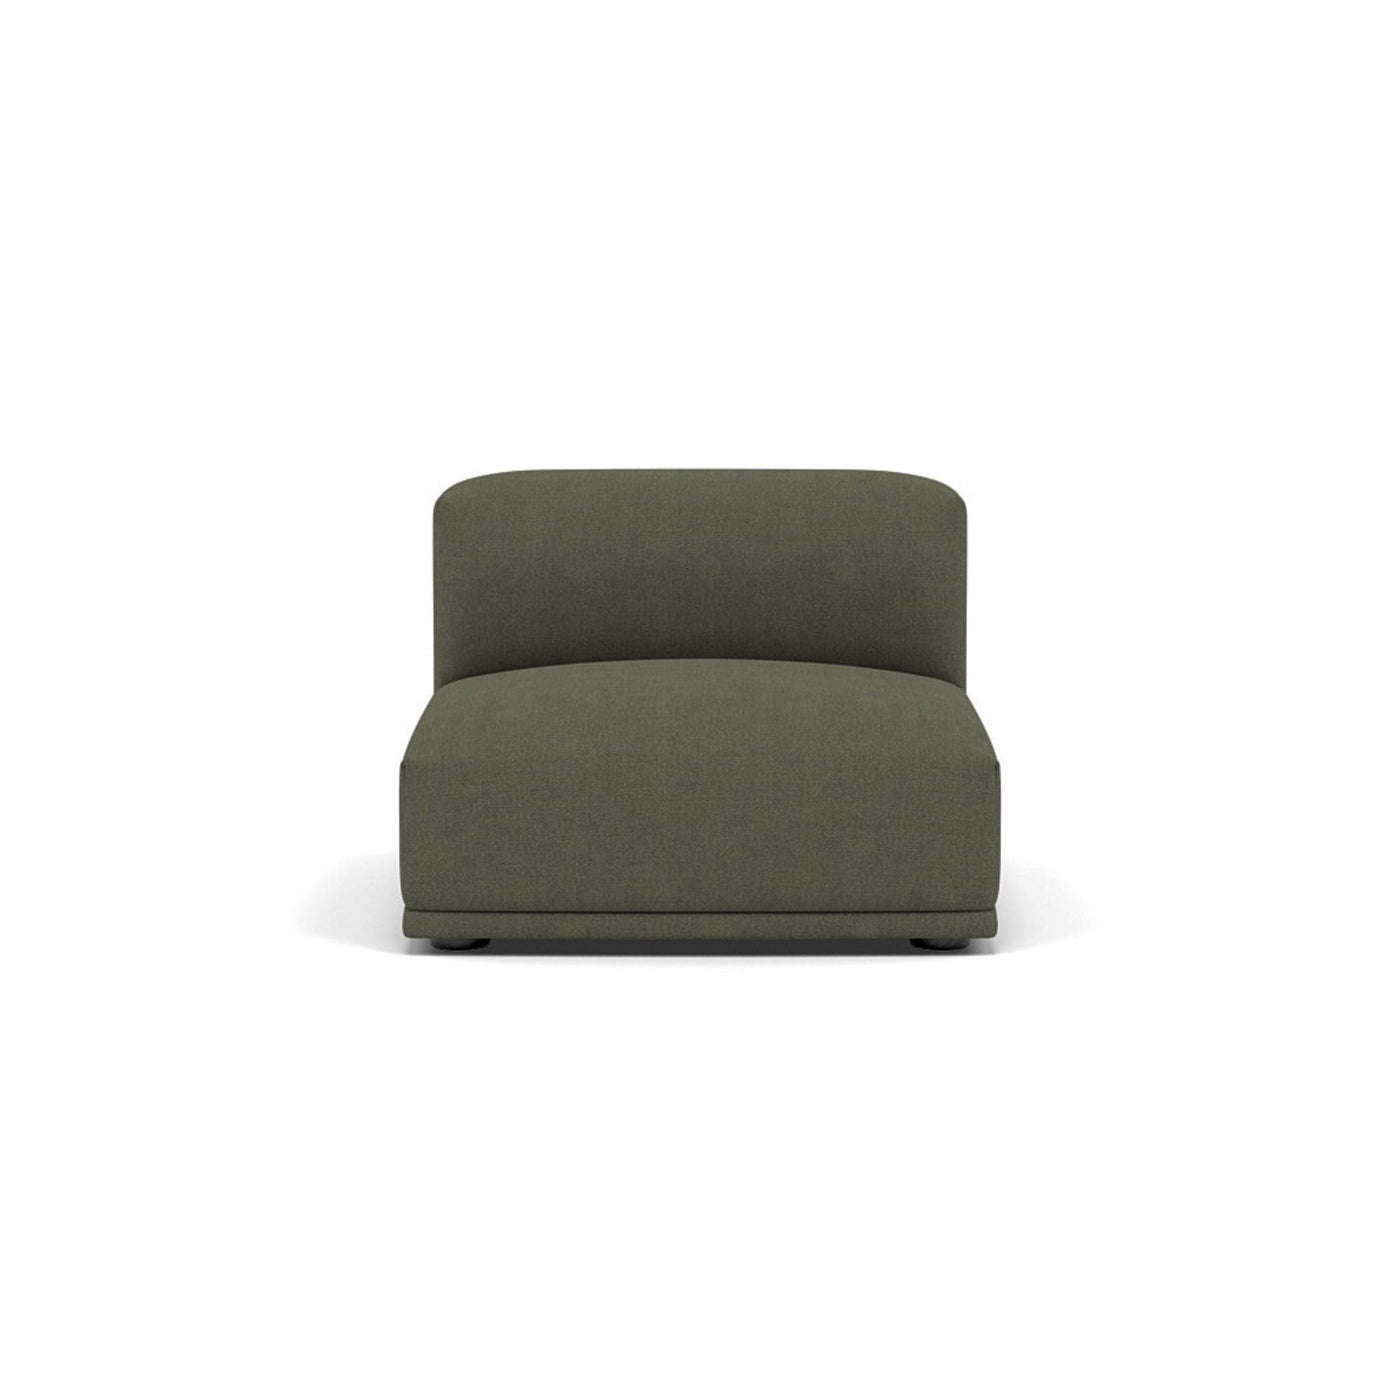 Muuto Connect Modular Sofa System, module d, short centre, fiord 961 fabric. Available from someday designs. #colour_fiord-961